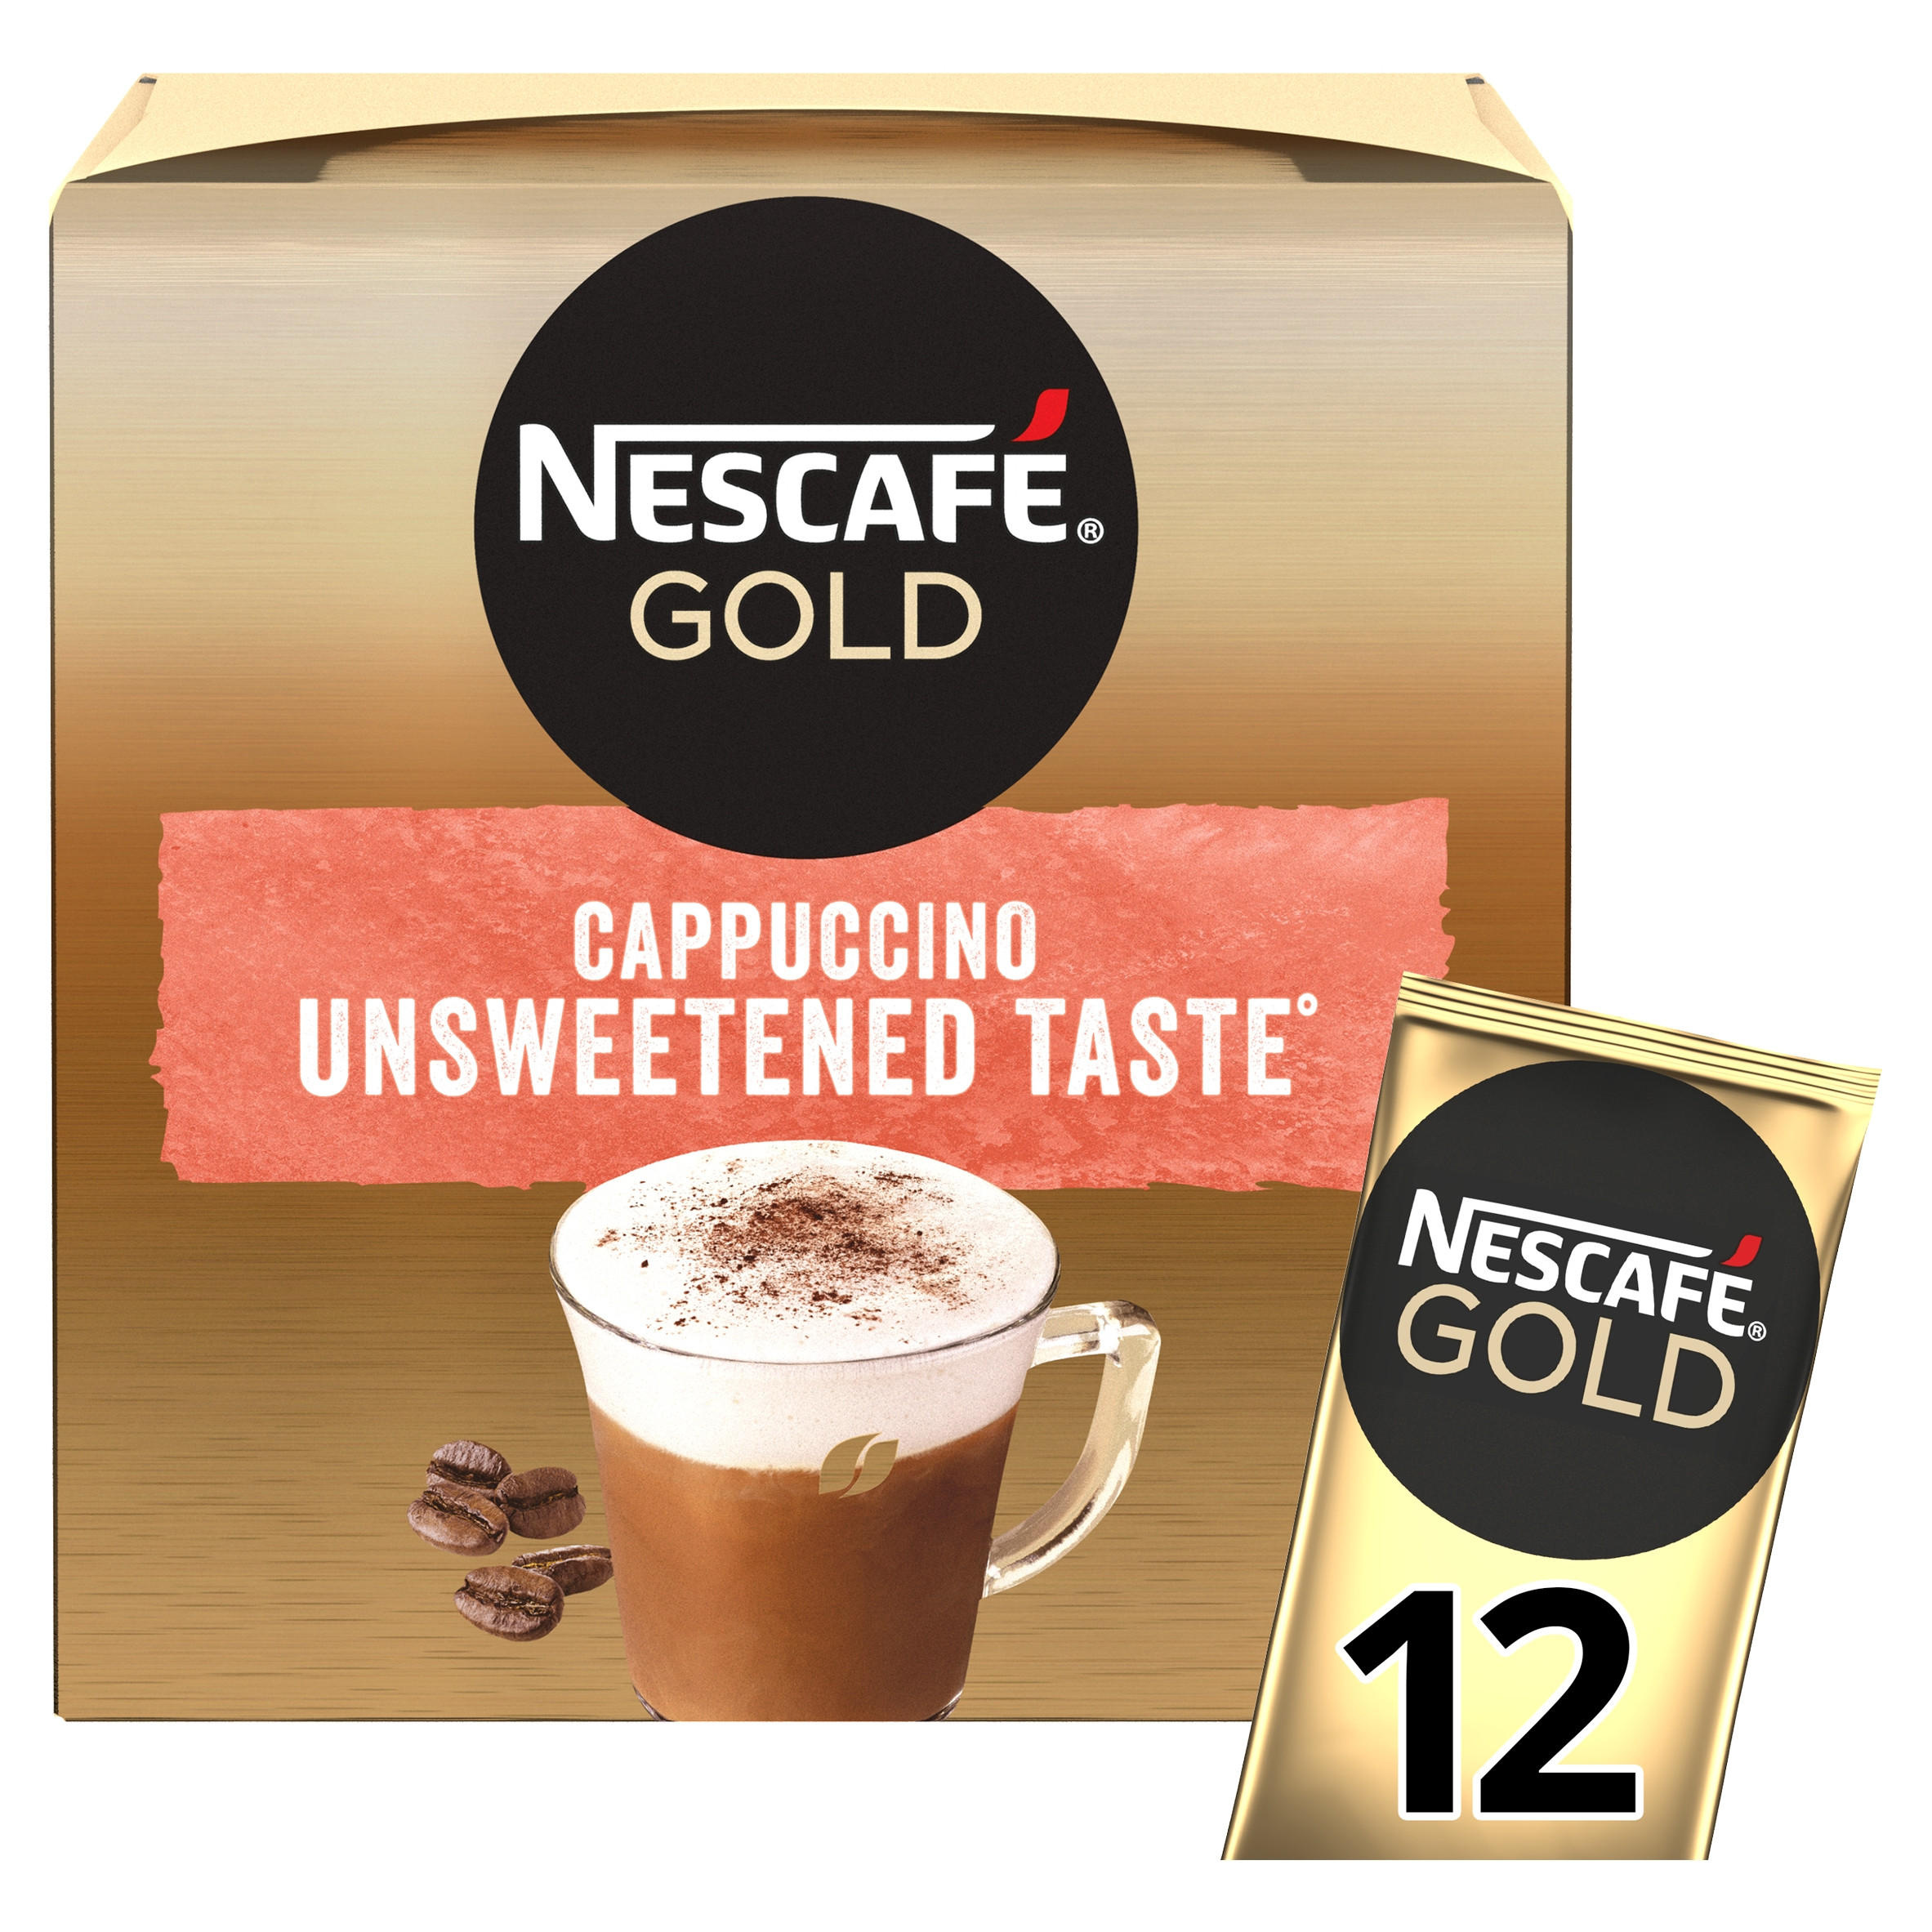 https://assets.iceland.co.uk/i/iceland/nescafe_gold_cappuccino_unsweetened_instant_coffee_12_x_142g_sachets_84169_T517.jpg?$pdpzoom$